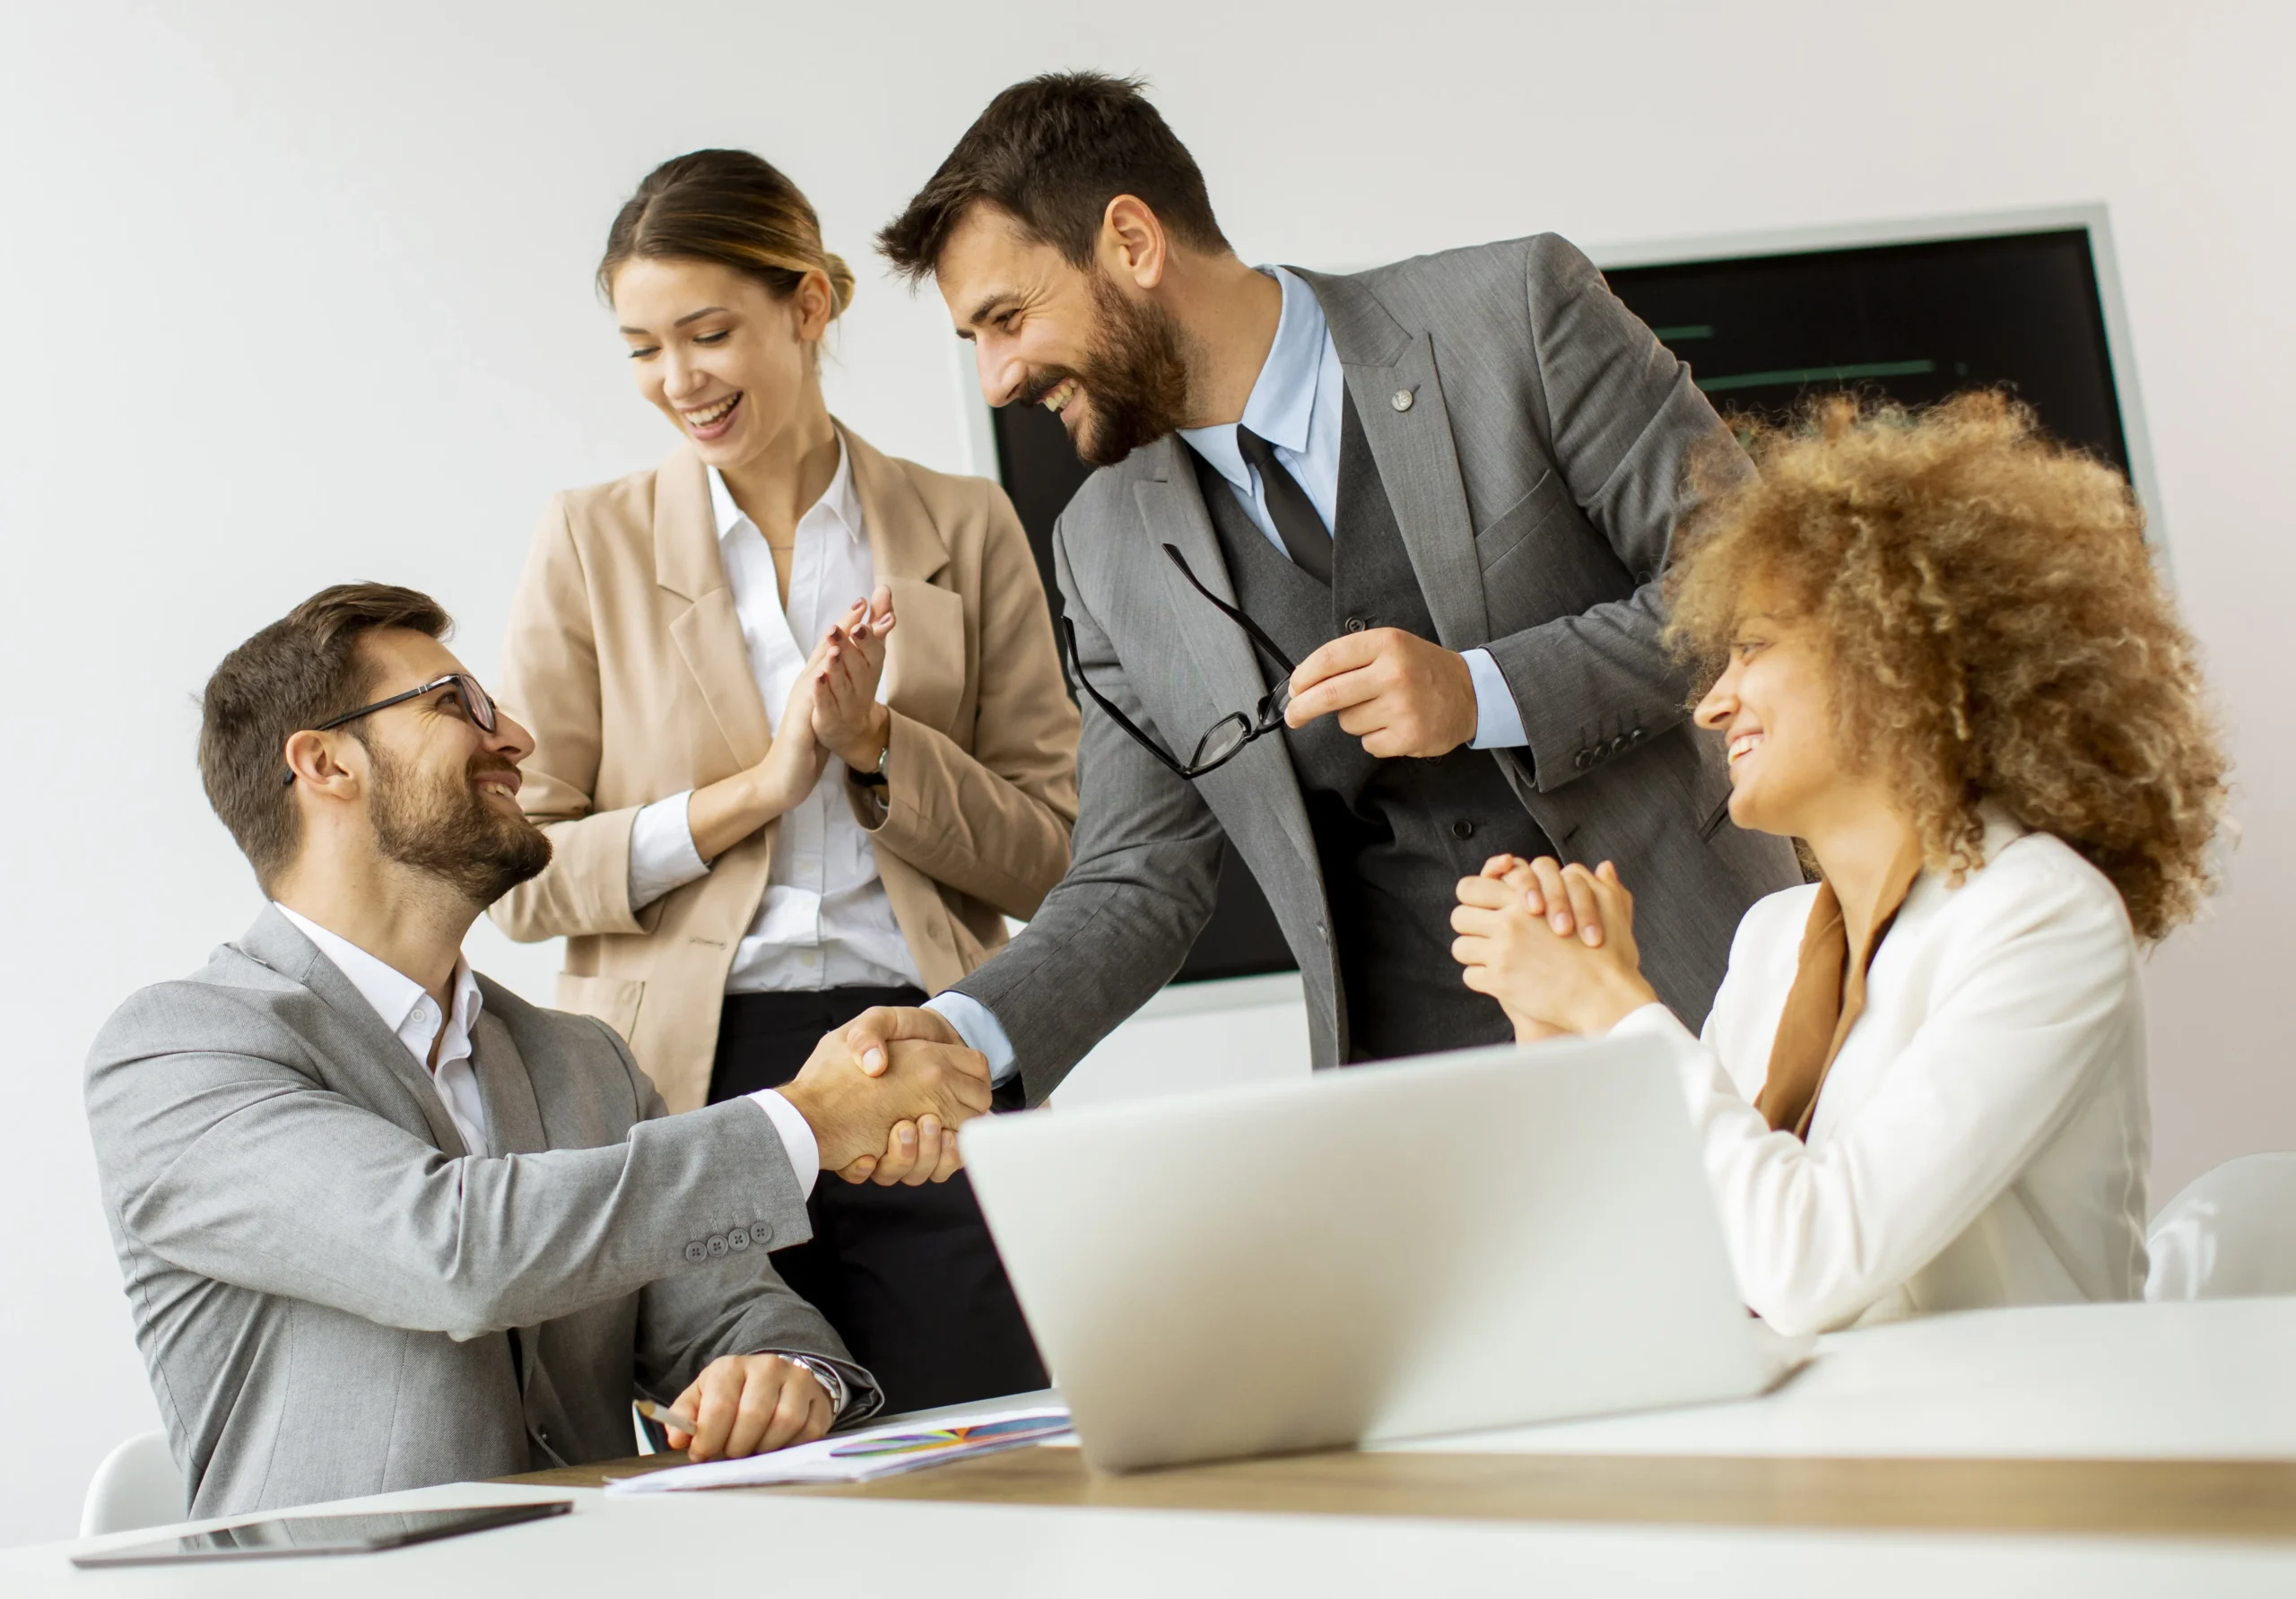 Business professionals celebrate successful negotiation with handshakes and smiles, reinforcing a seamless and positive purchasing experience for IT solutions